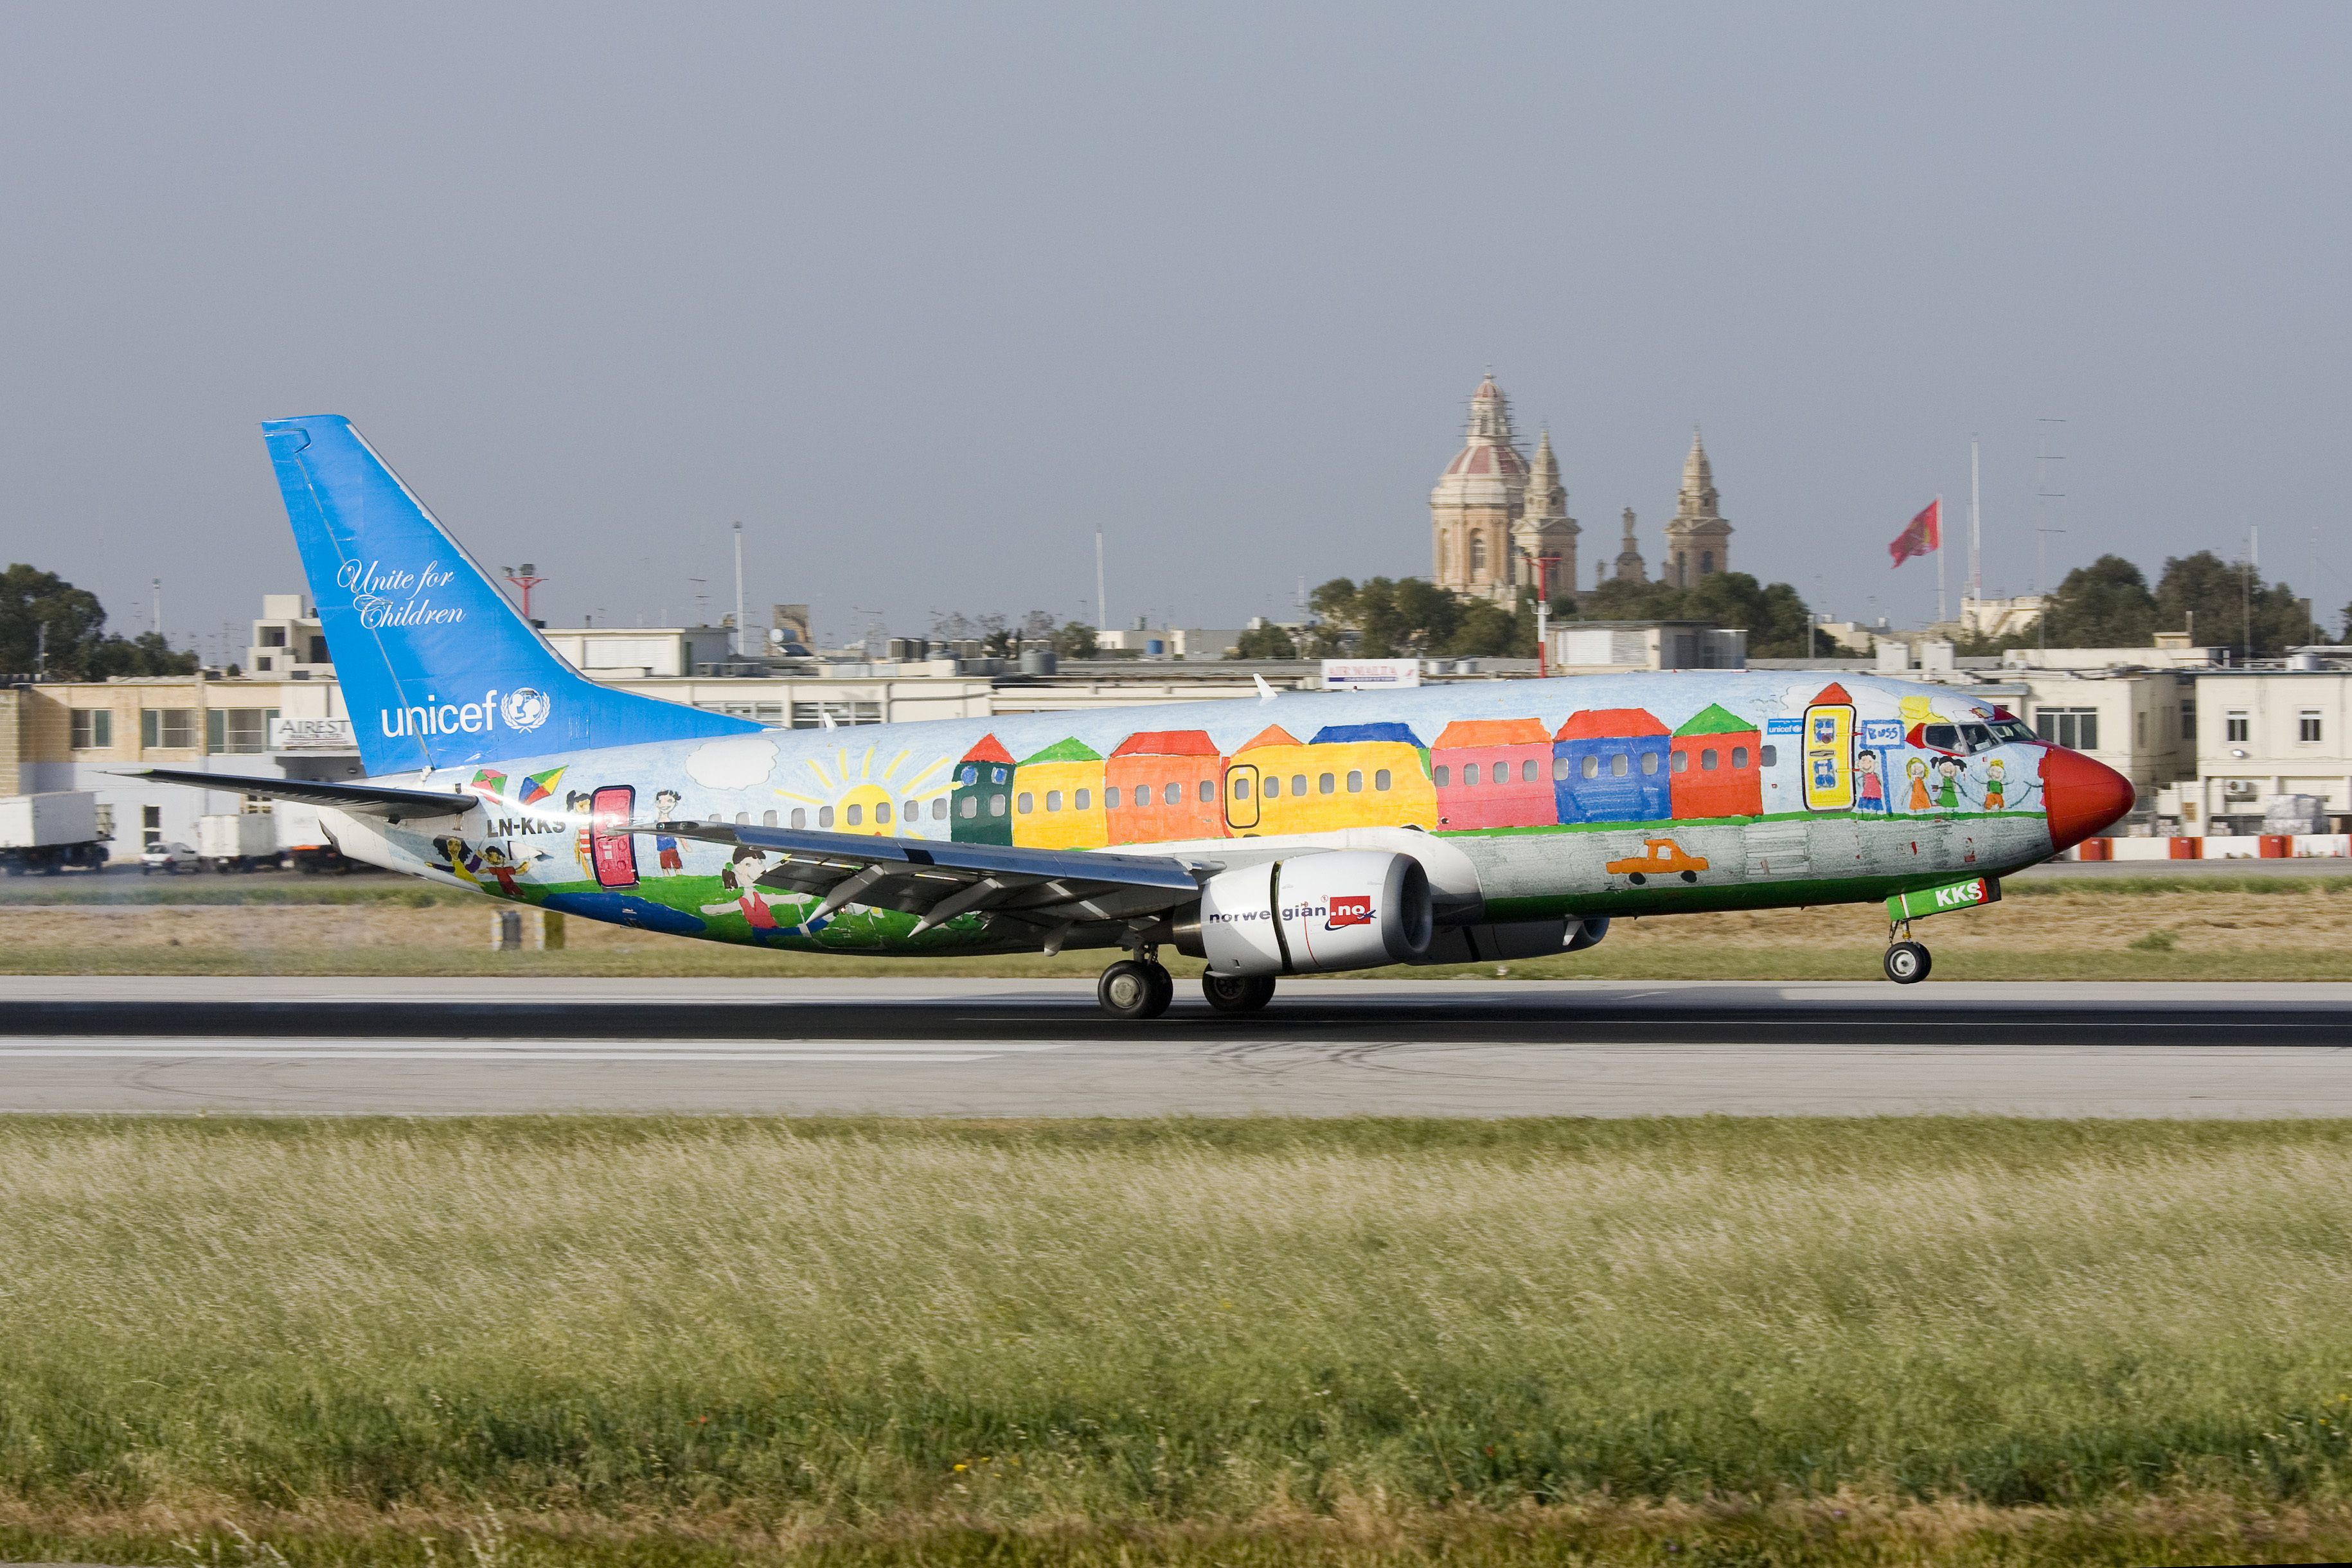 A Norwegian aircraft in UNICEF livery taking off.